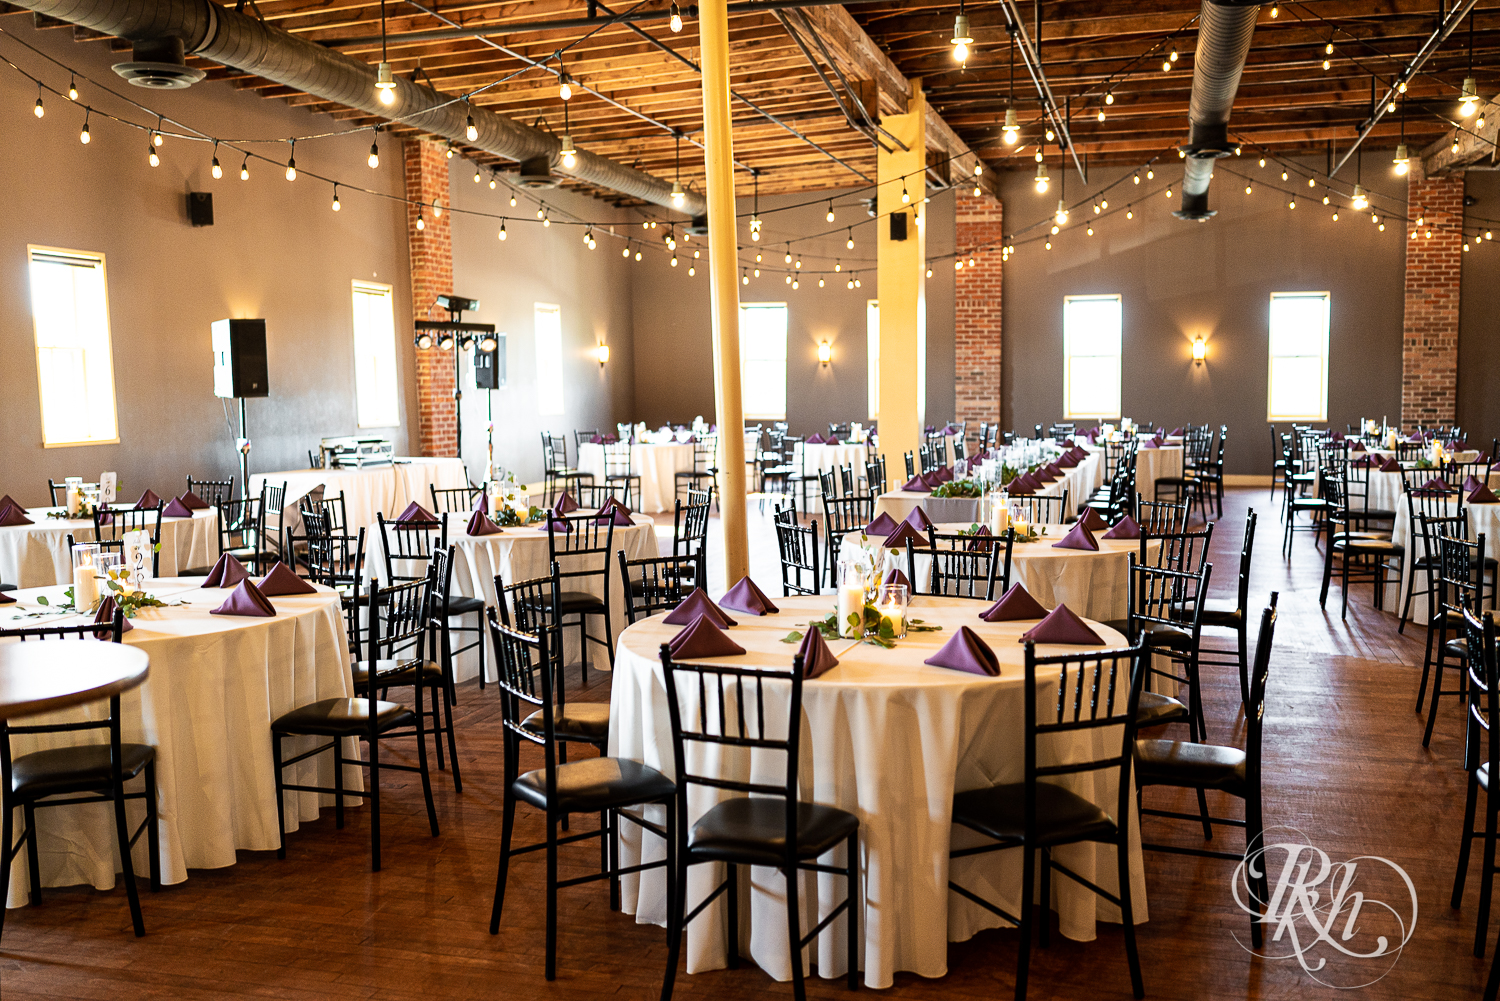 Indoor wedding reception setup with purple accents and string lights at Cannon River Winery in Cannon Falls, Minnesota.